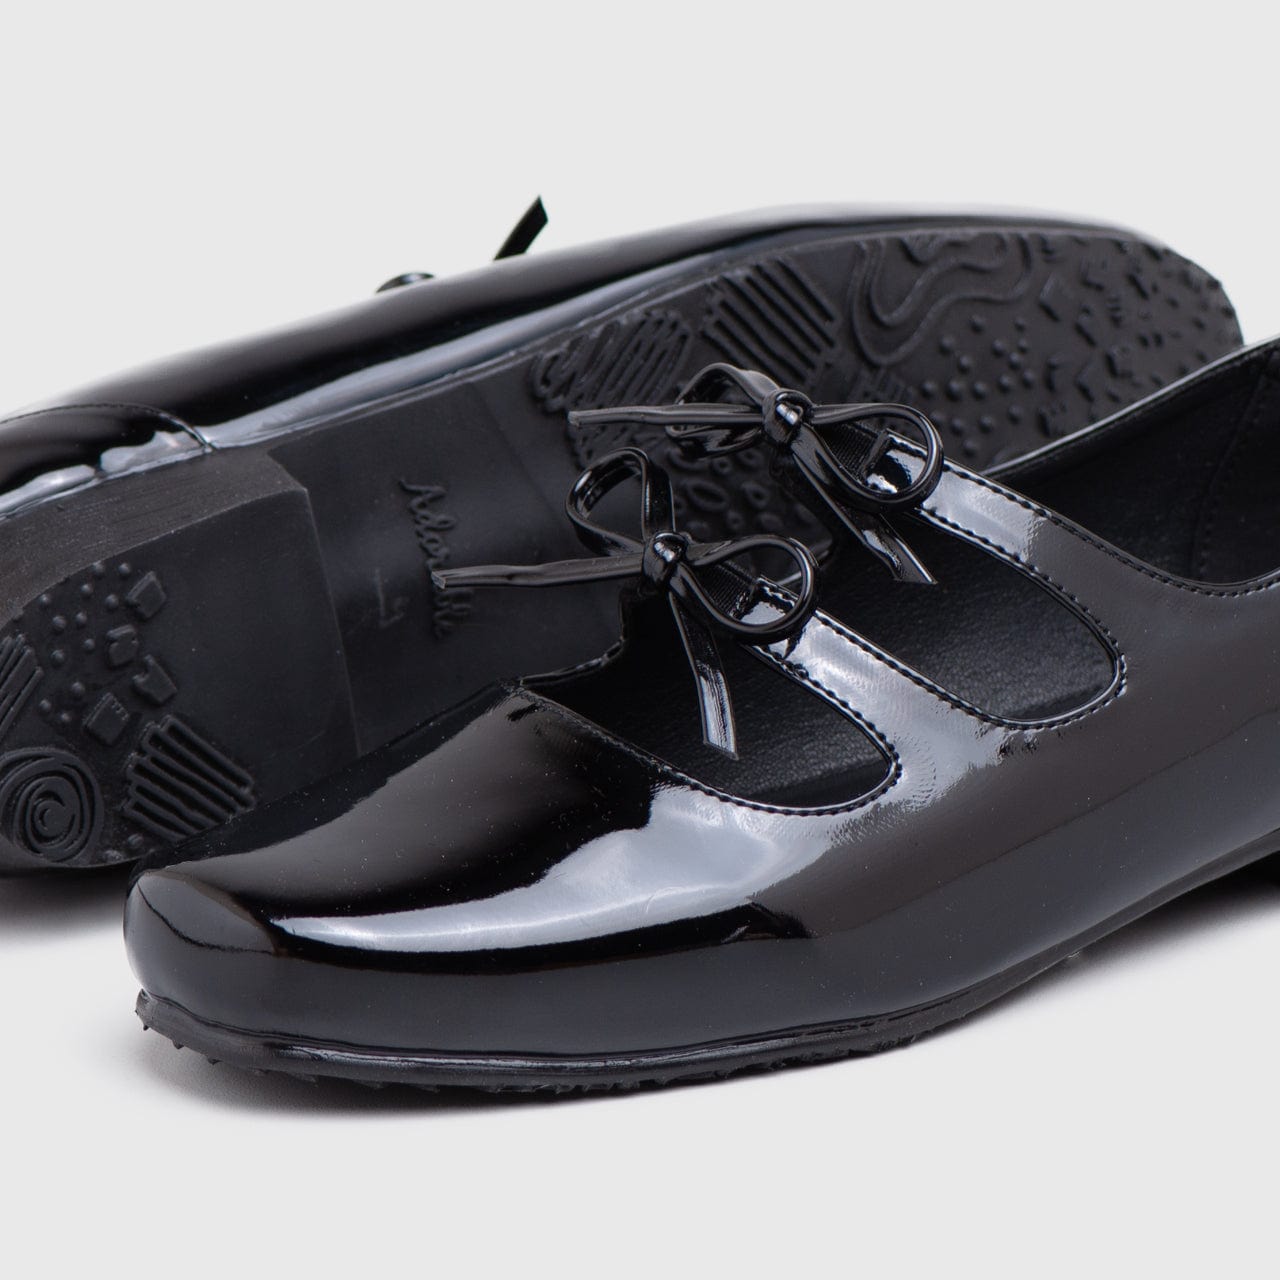 Adorable Projects Official Adorableprojects - Madison Flat Shoes Patent Black